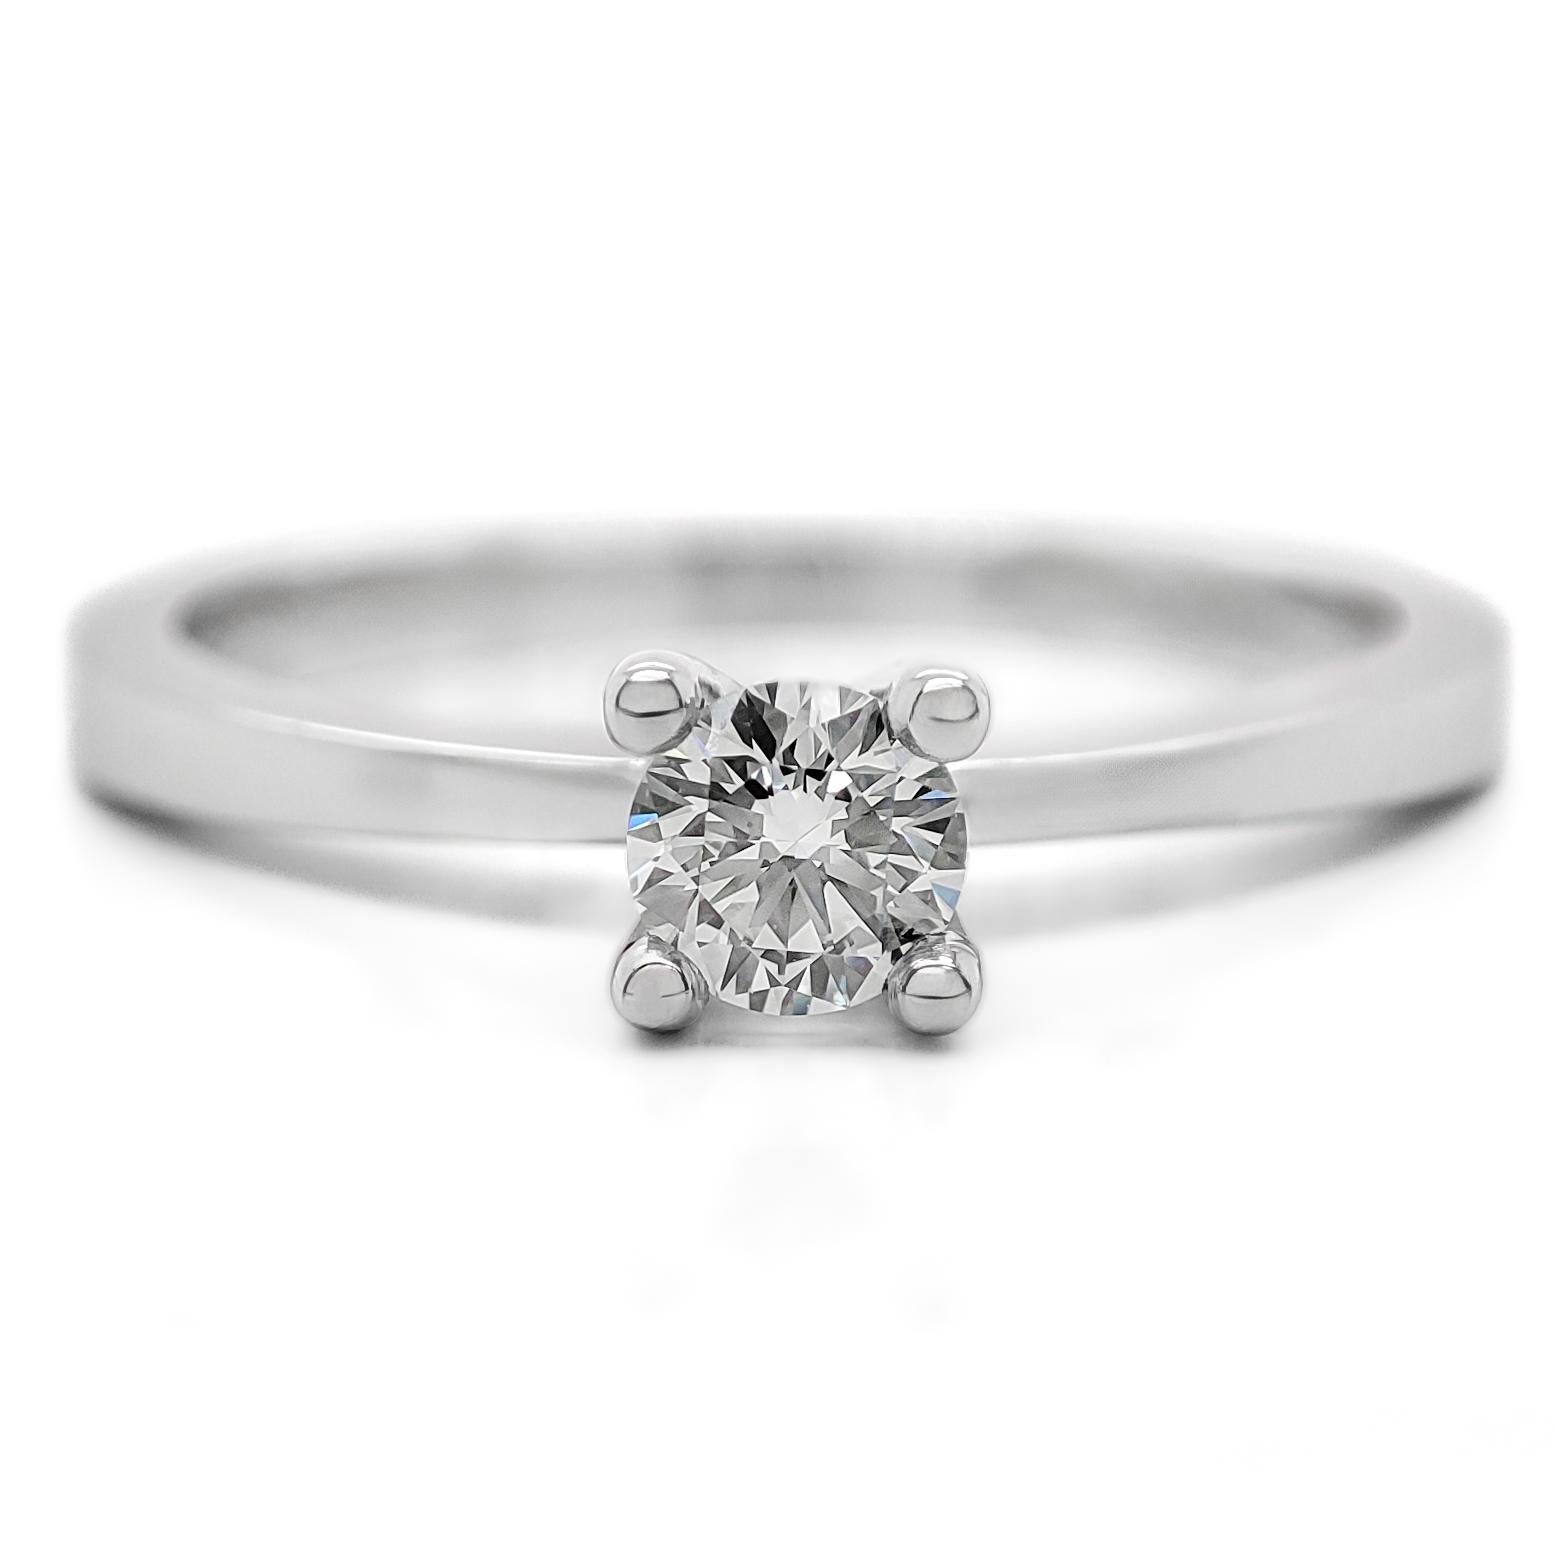 FOR US BUYER NO VAT

This solitaire engagement ring is a timeless symbol of your love and commitment. It features a brilliant 0.20 carat round diamond as its centerpiece, radiating its captivating and enduring sparkle.

The ring is crafted in 18K